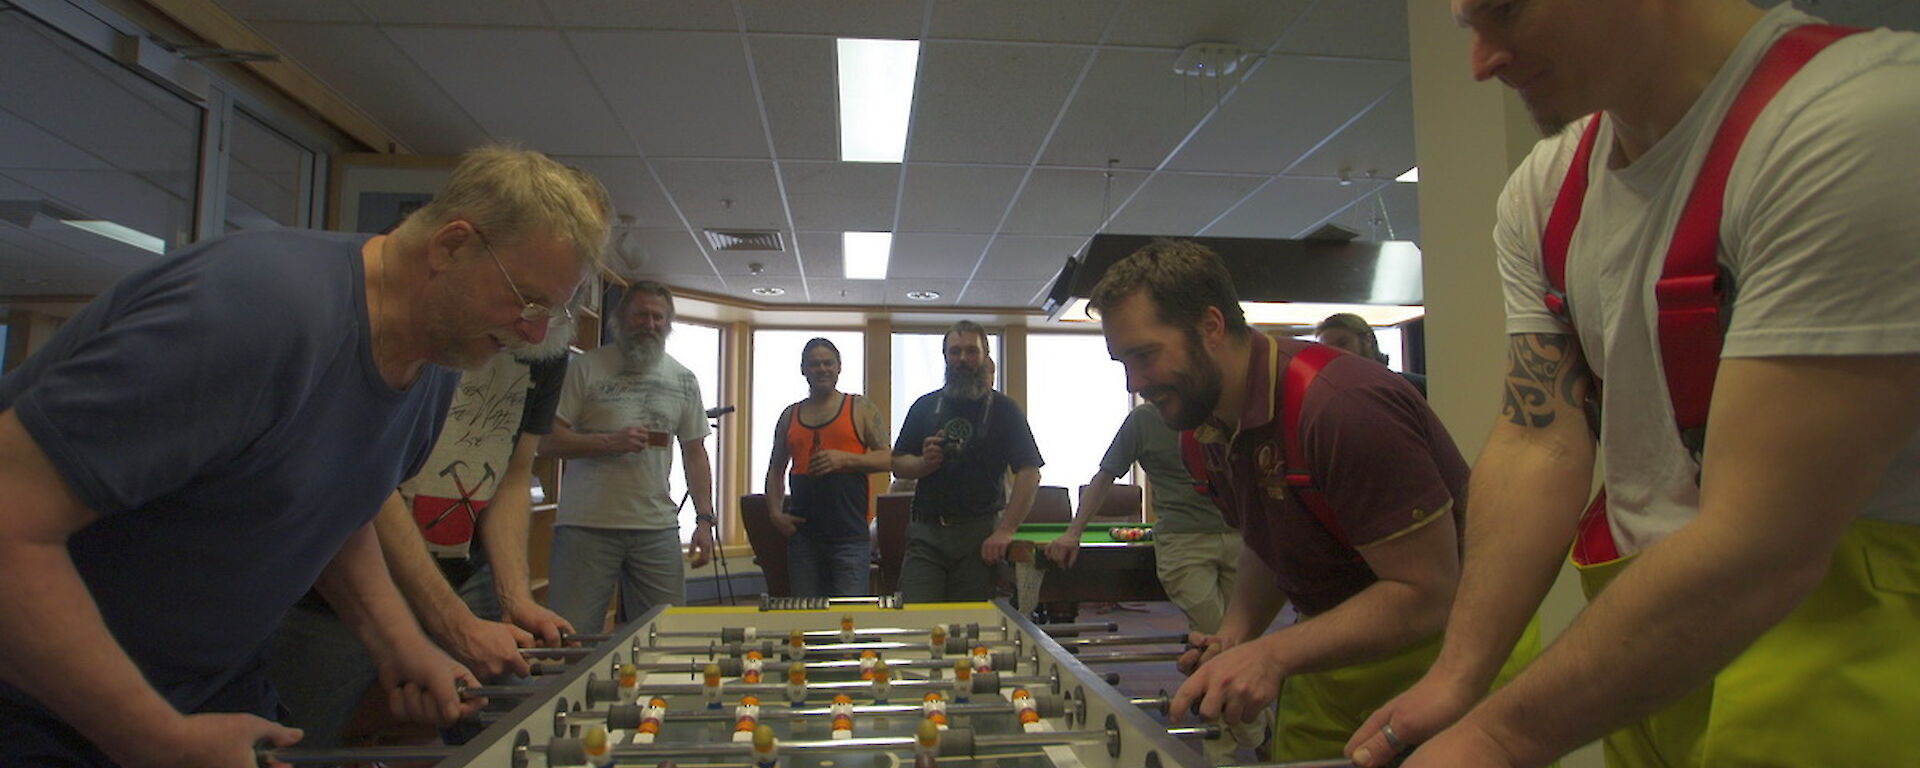 Expeditioners playing opposite each other in the tabletop football final